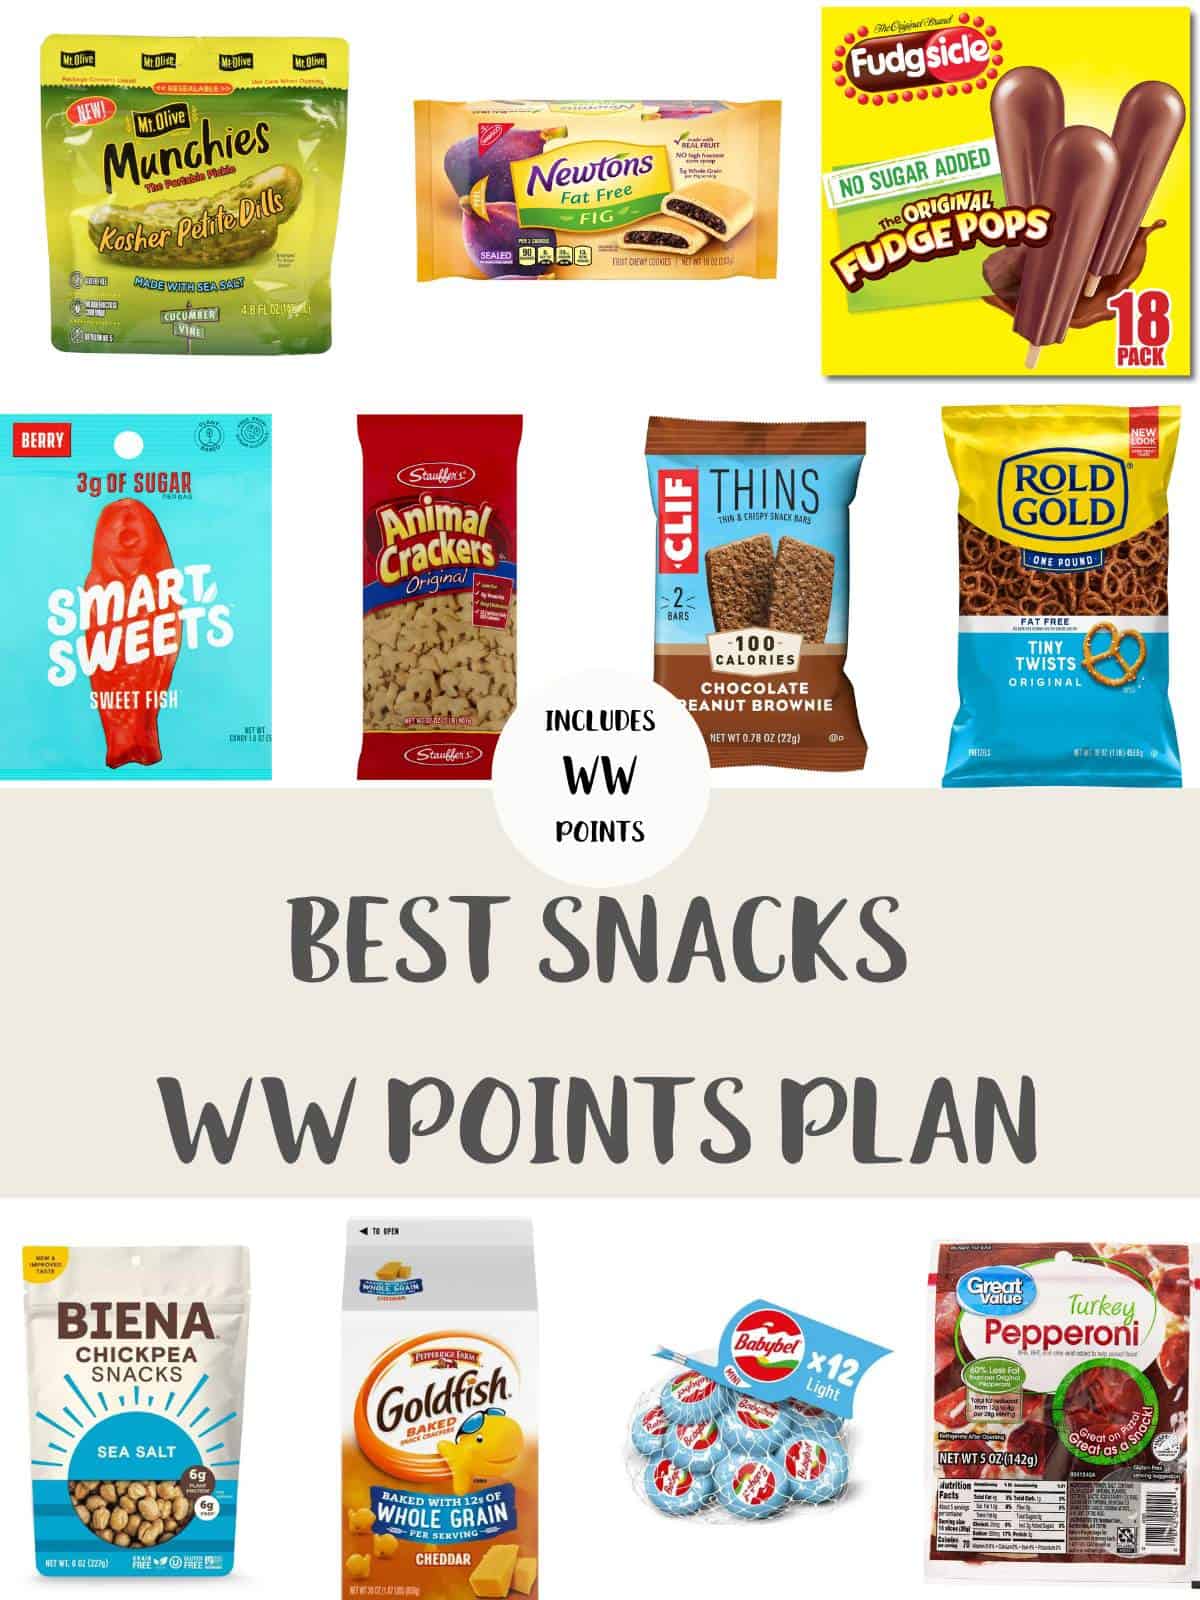 A collage of foods with text overlay stating Best Snacks WW Points Plan.